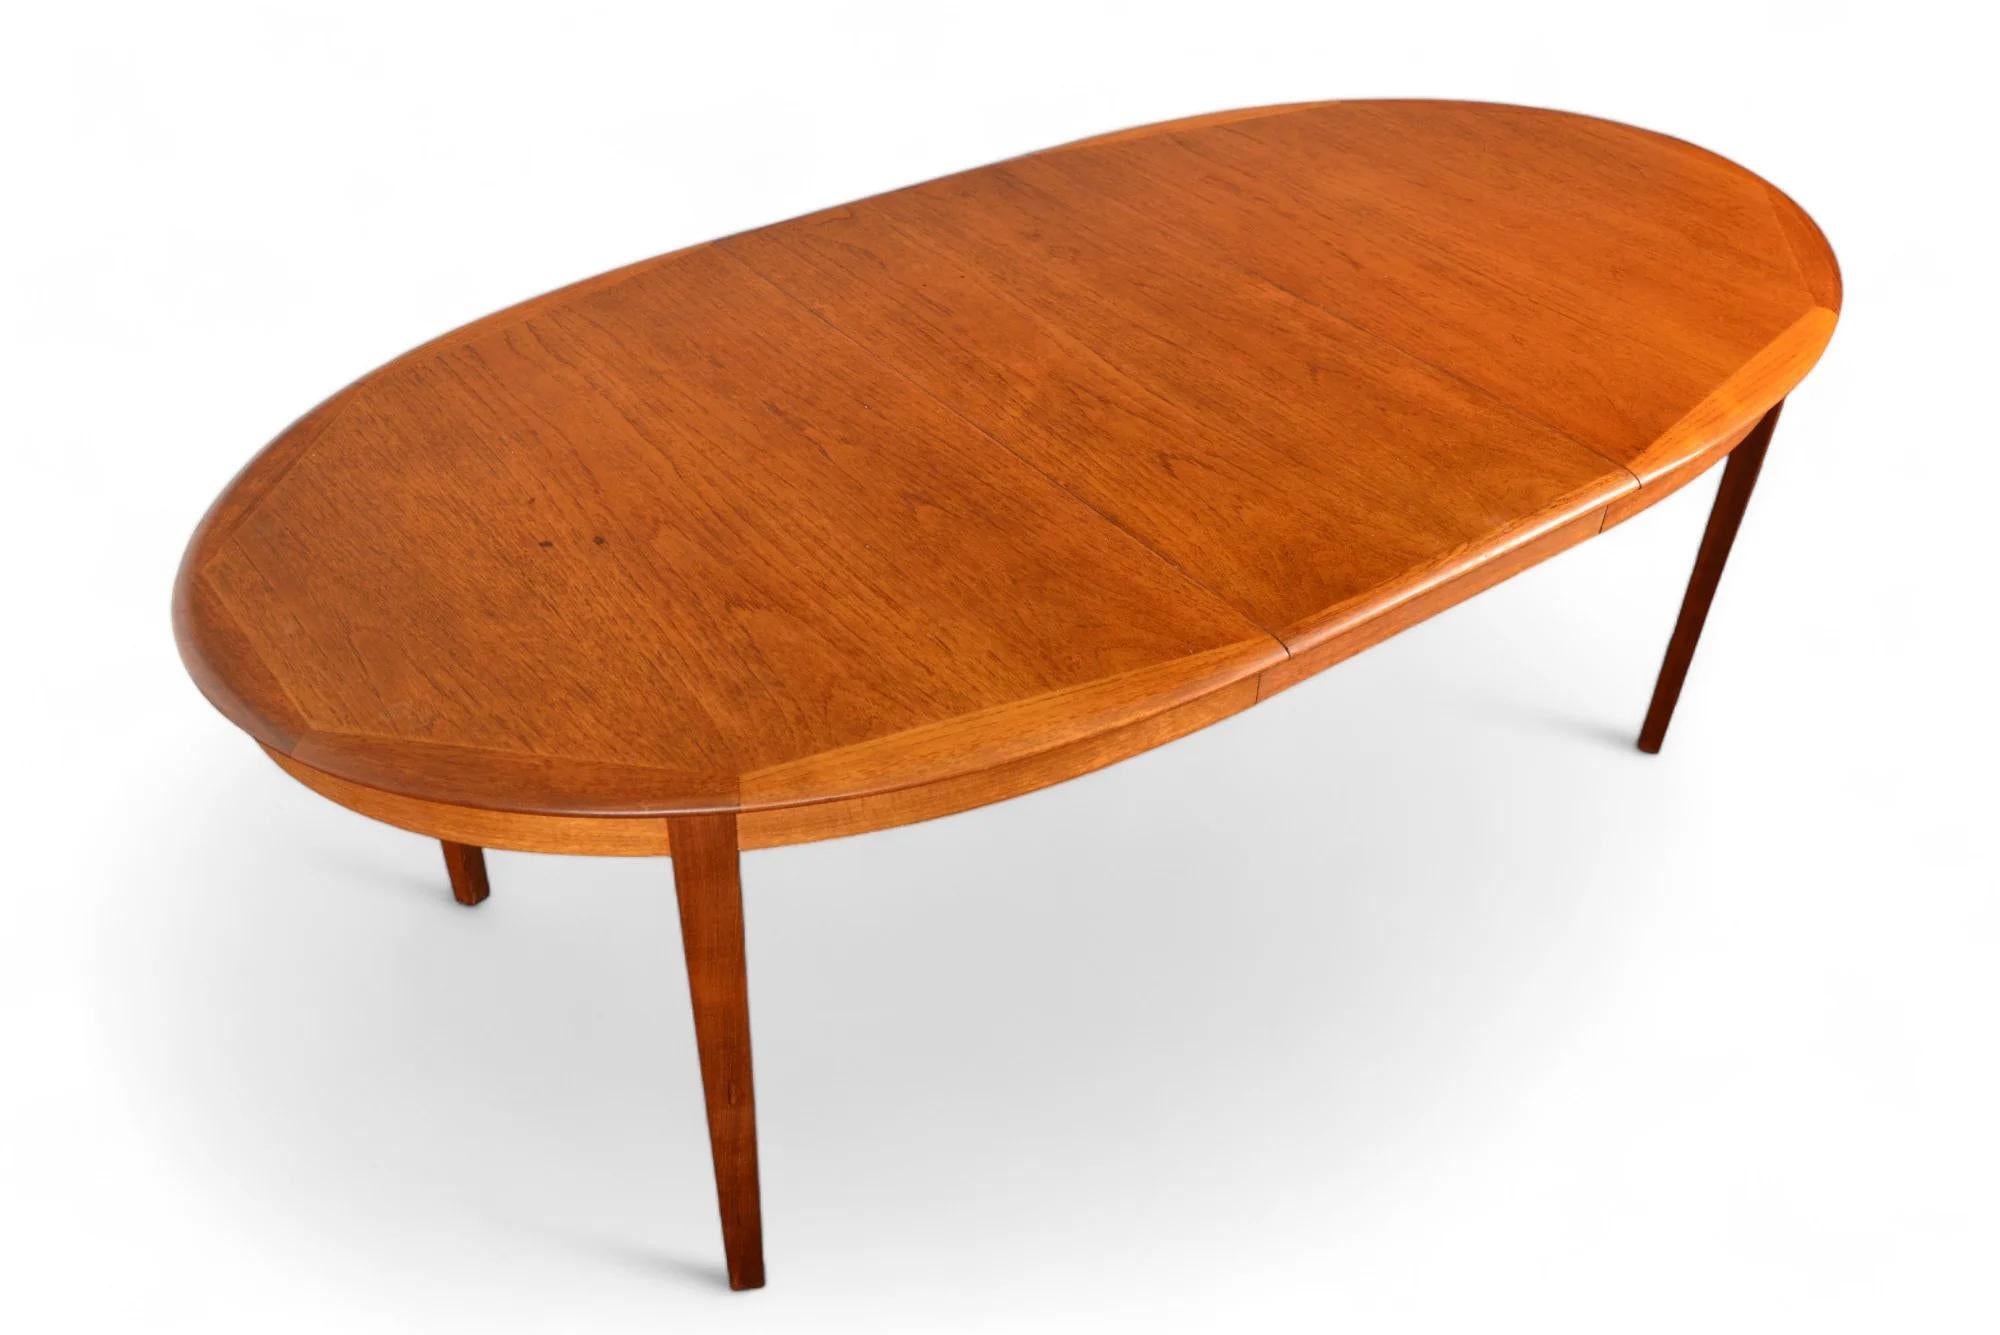 Danish Modern Oval Teak Dining Table + Two Leaves By Byrlund For Sale 1